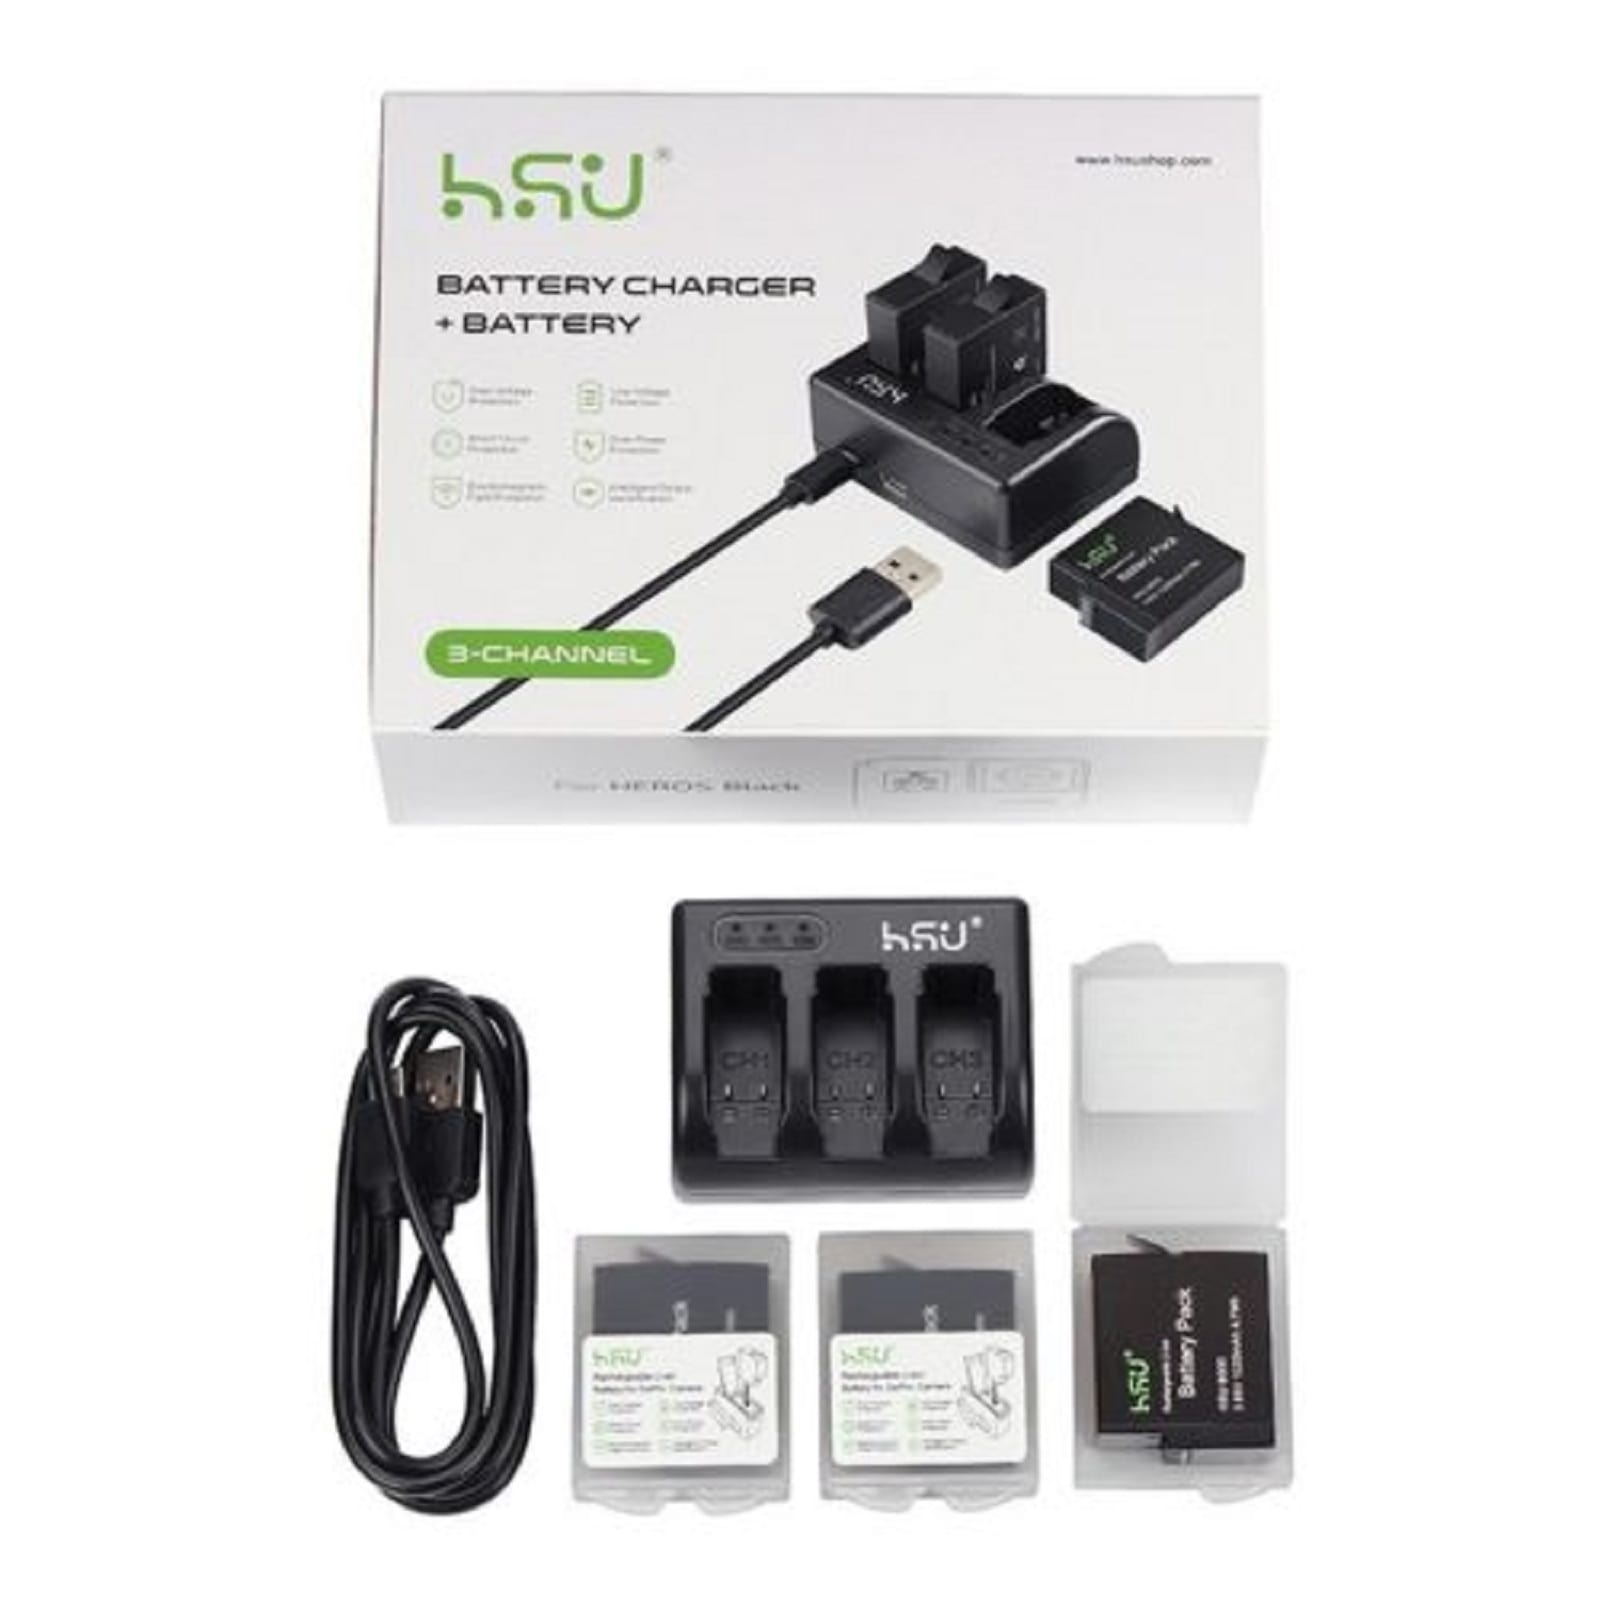 HSU Battery Set Kit with USB Charger for GoPro HERO 3 4 5 6 & 7